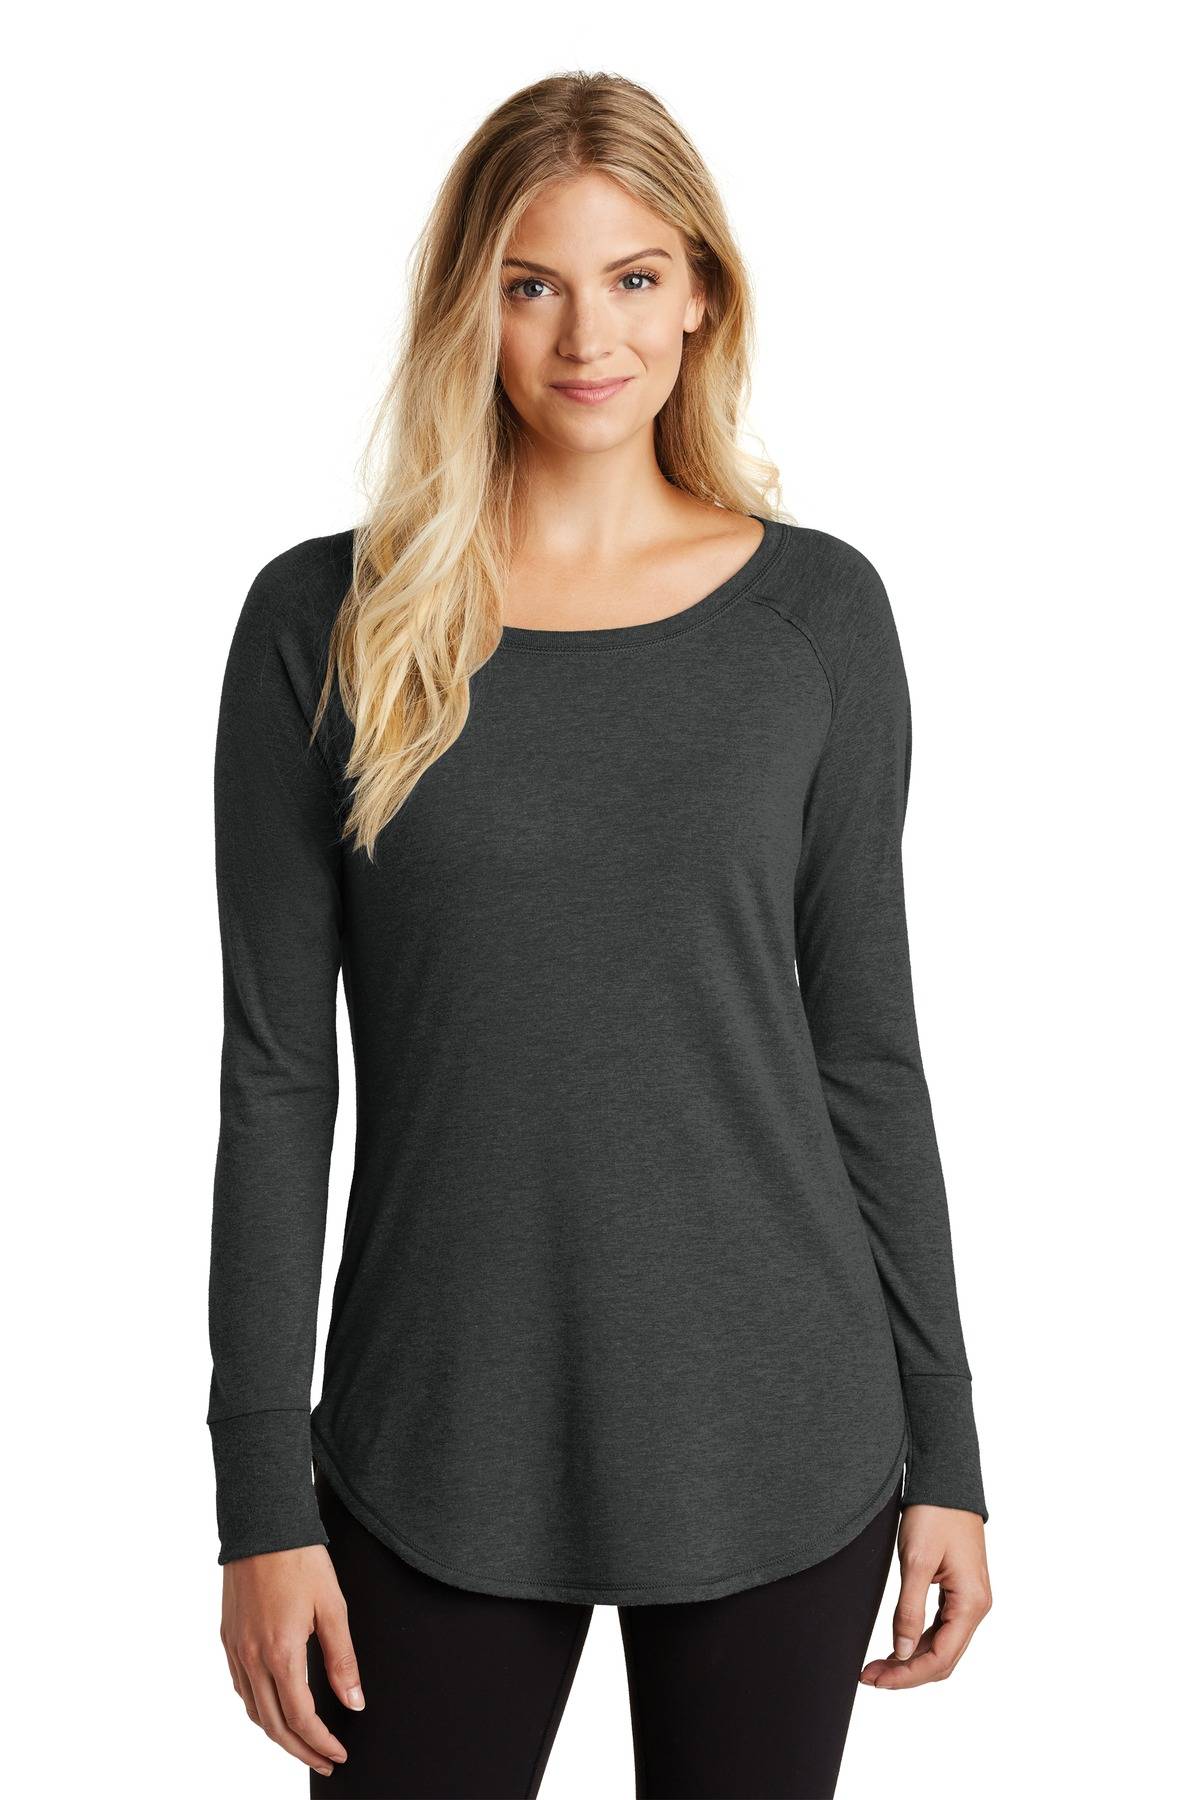 District Made DT132L Womens Long Sleeve Lightweight Perfect Tri Scoop Neck T-Shirt